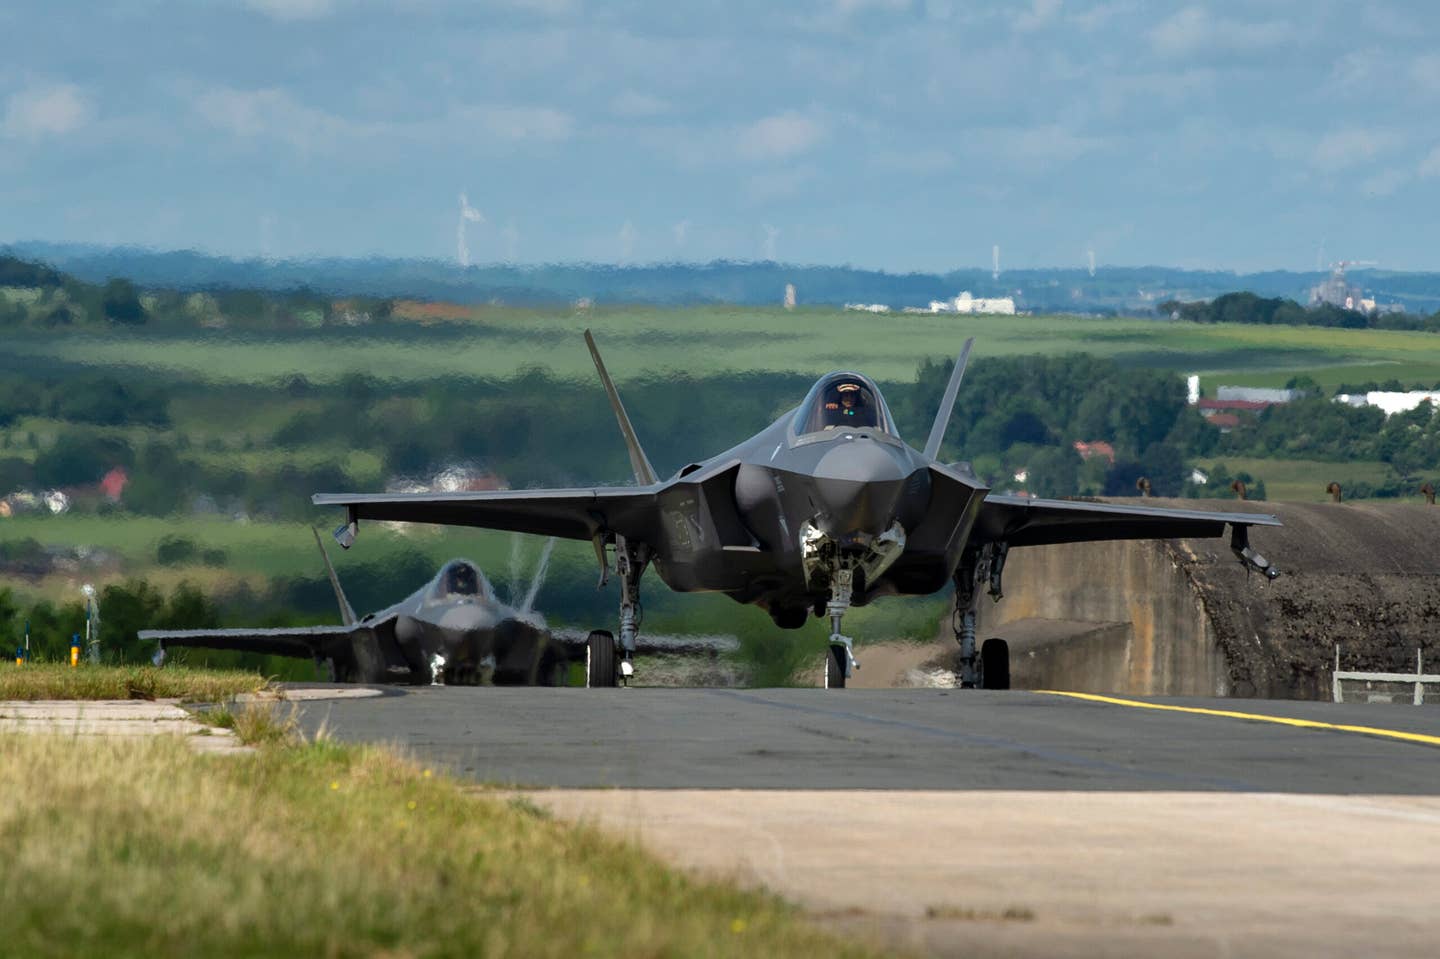 U.S. Air Force F-35As, assigned to the 421st Fighter Squadron, Hill Air Force Base, Utah, taxi on the flight line at Spangdahlem Air Base, Germany, in June 2019. <em>U.S. Air Force photo by Airman 1st Class Valerie Seelye</em>